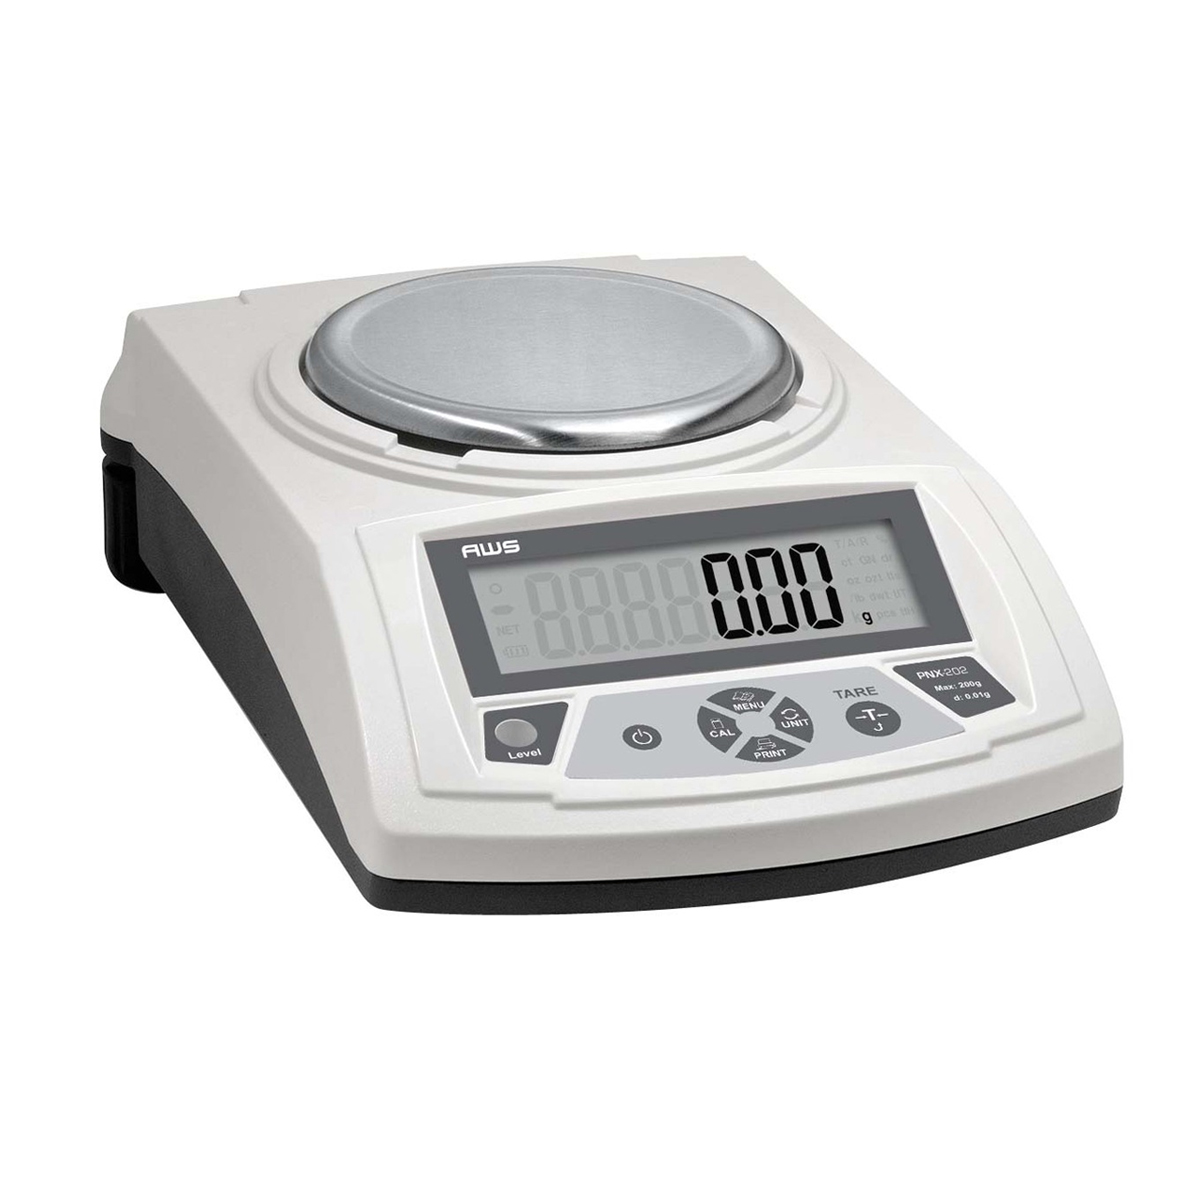  AC Pro Digital Pocket Weight Scale 200g x 0.01g, Home